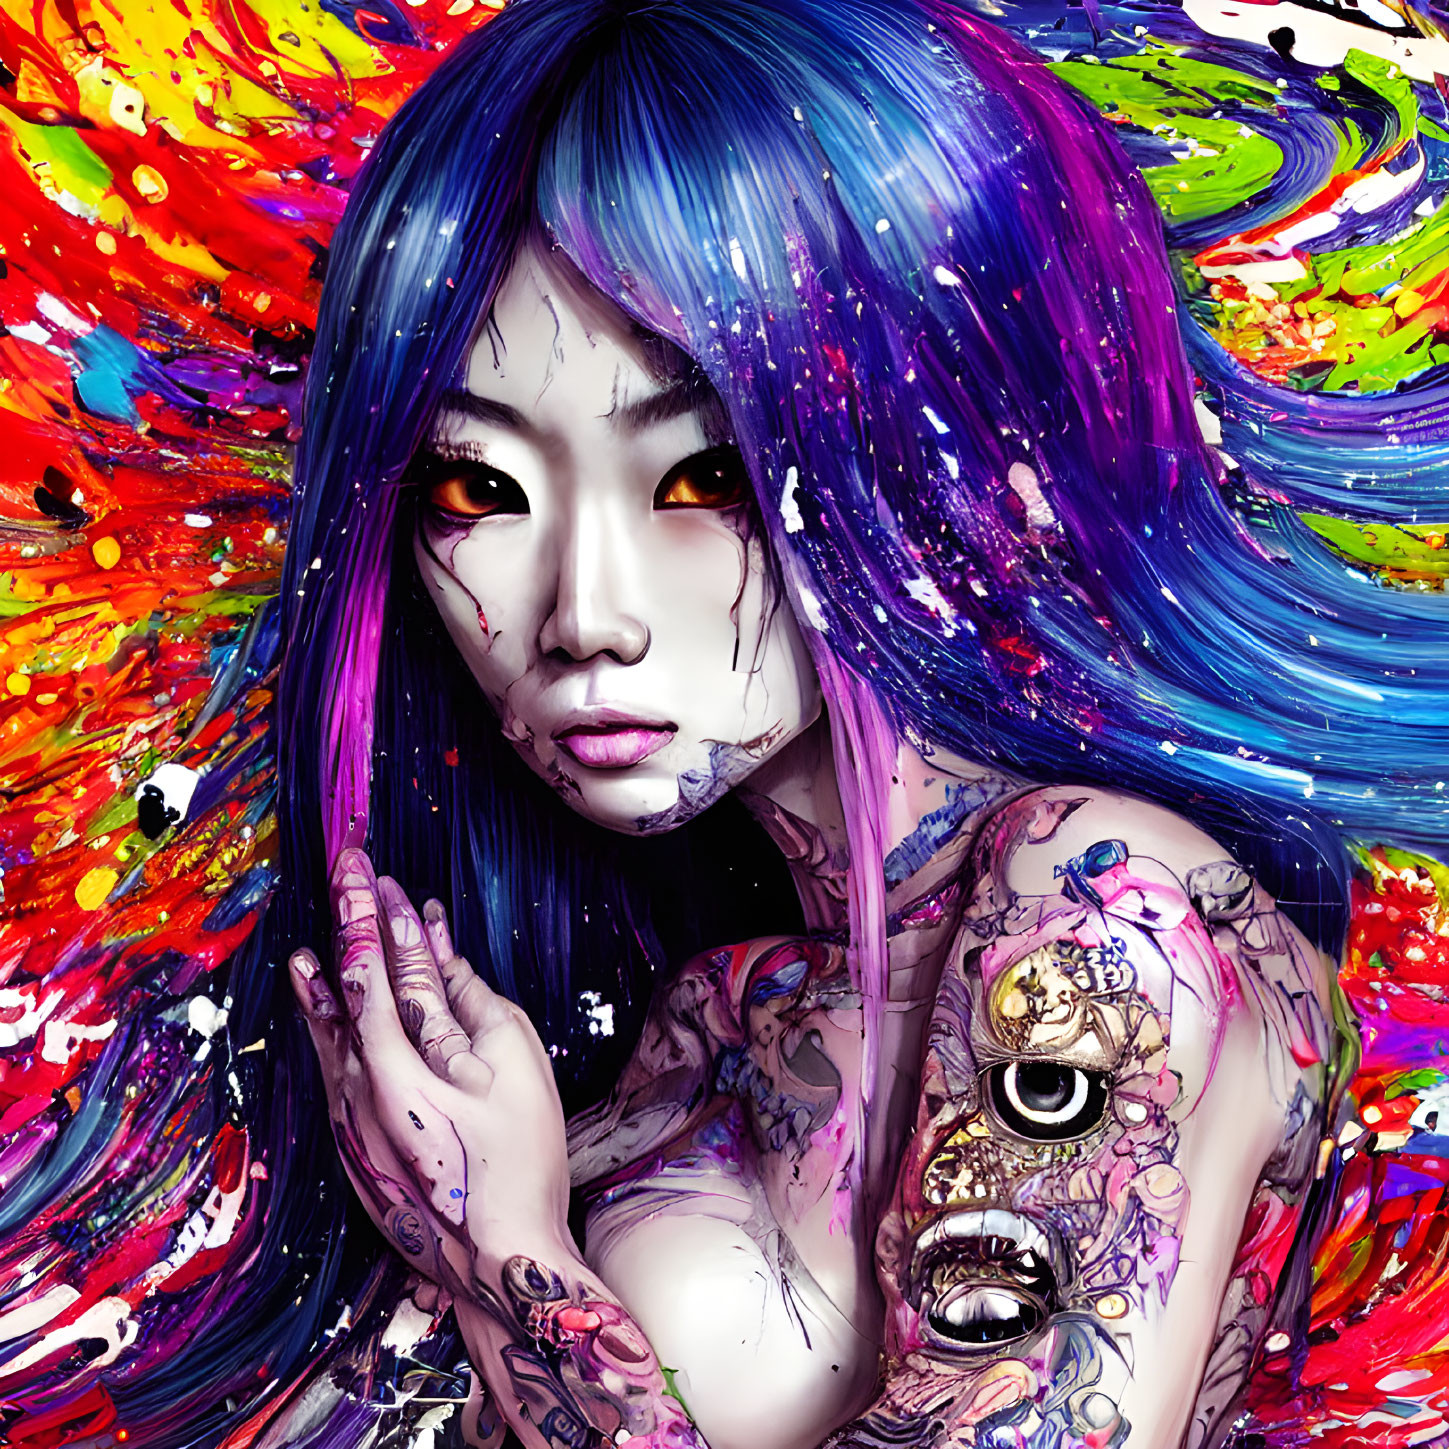 Colorful digital portrait featuring person with blue and purple hair, tattoos, and paint splashes.